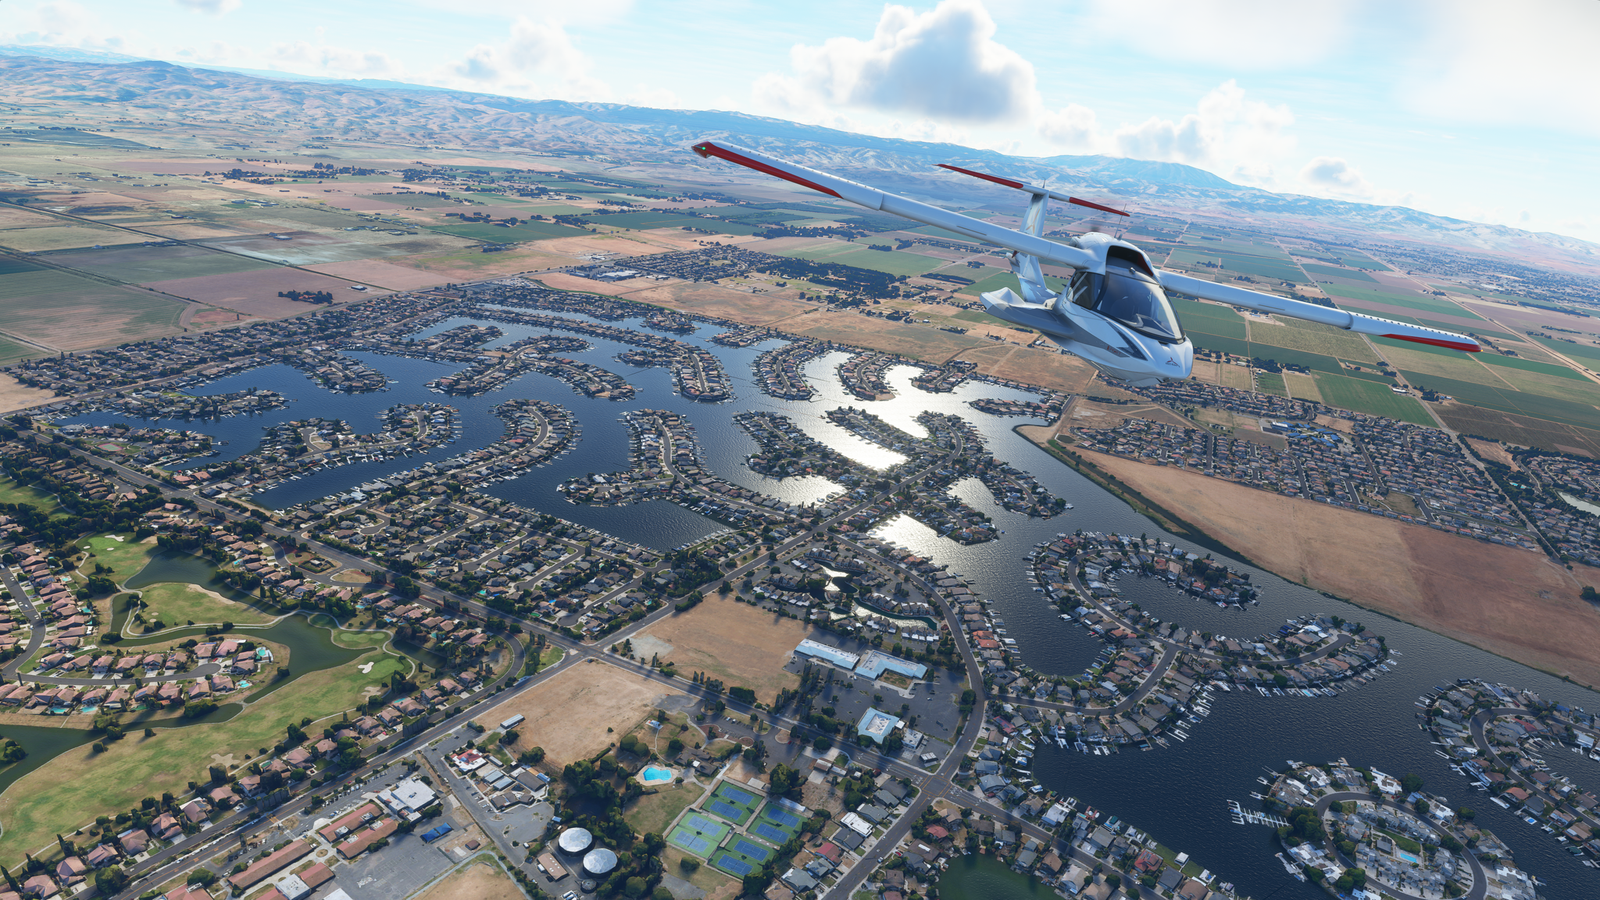 MS Flight Simulator 2020 can now use Google Maps textures globally